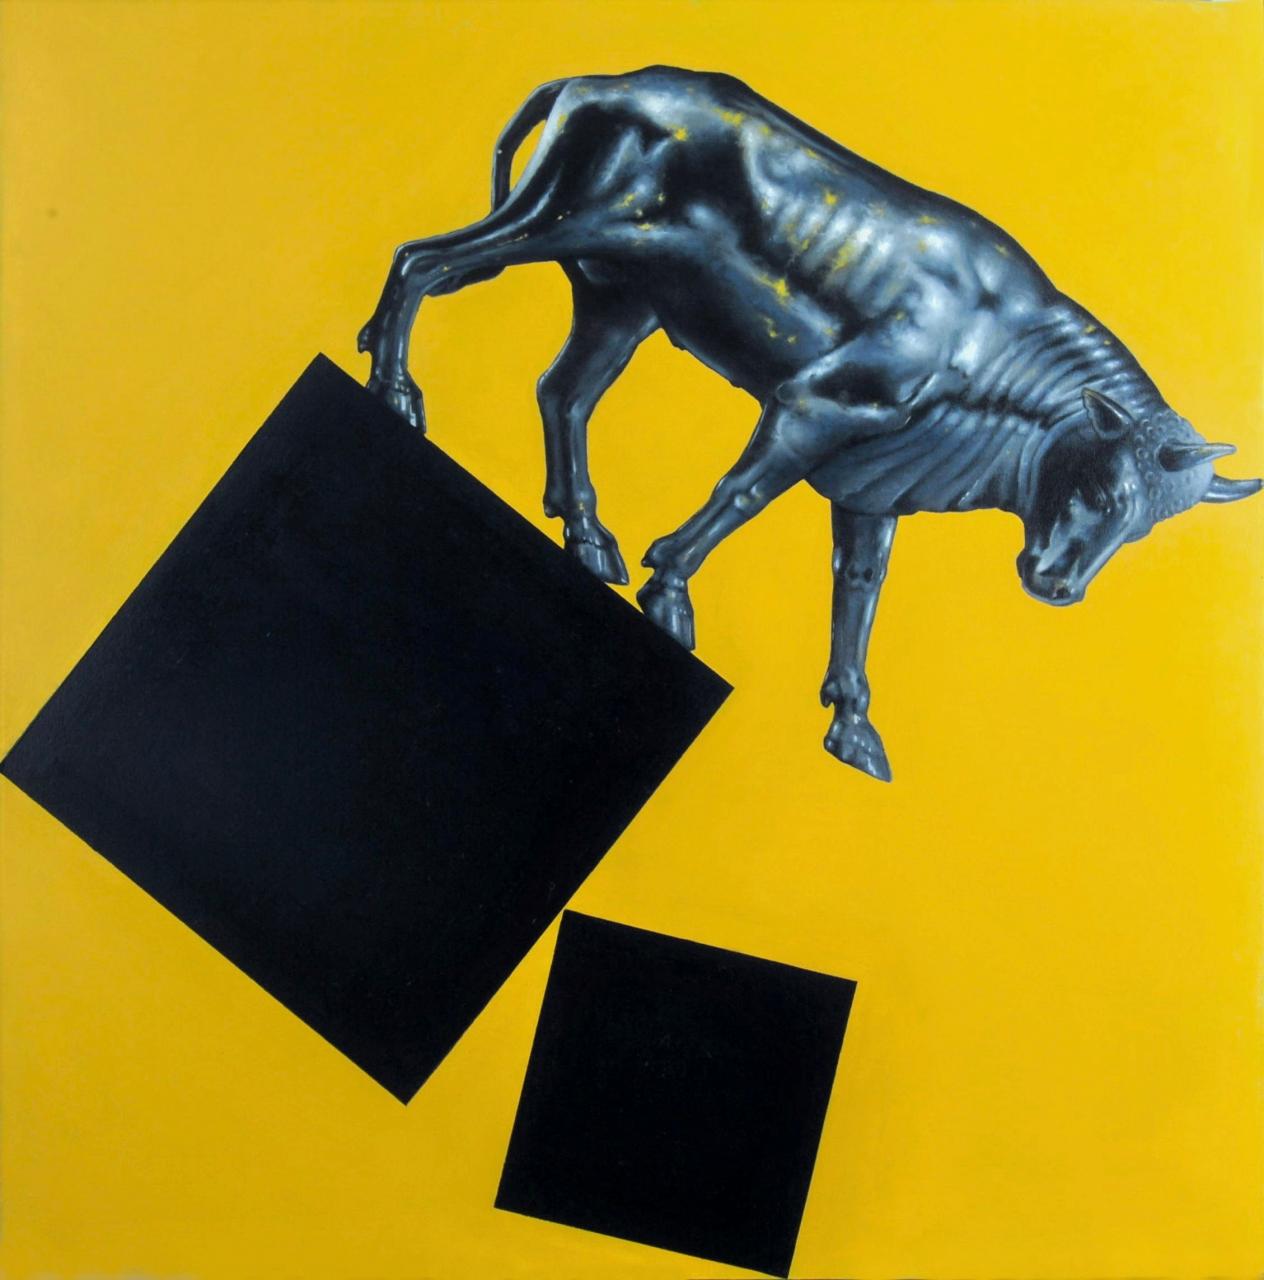 Nick Rooney painting, Nature of Gold. Blue ox on yellow background standing on black tilted square. 